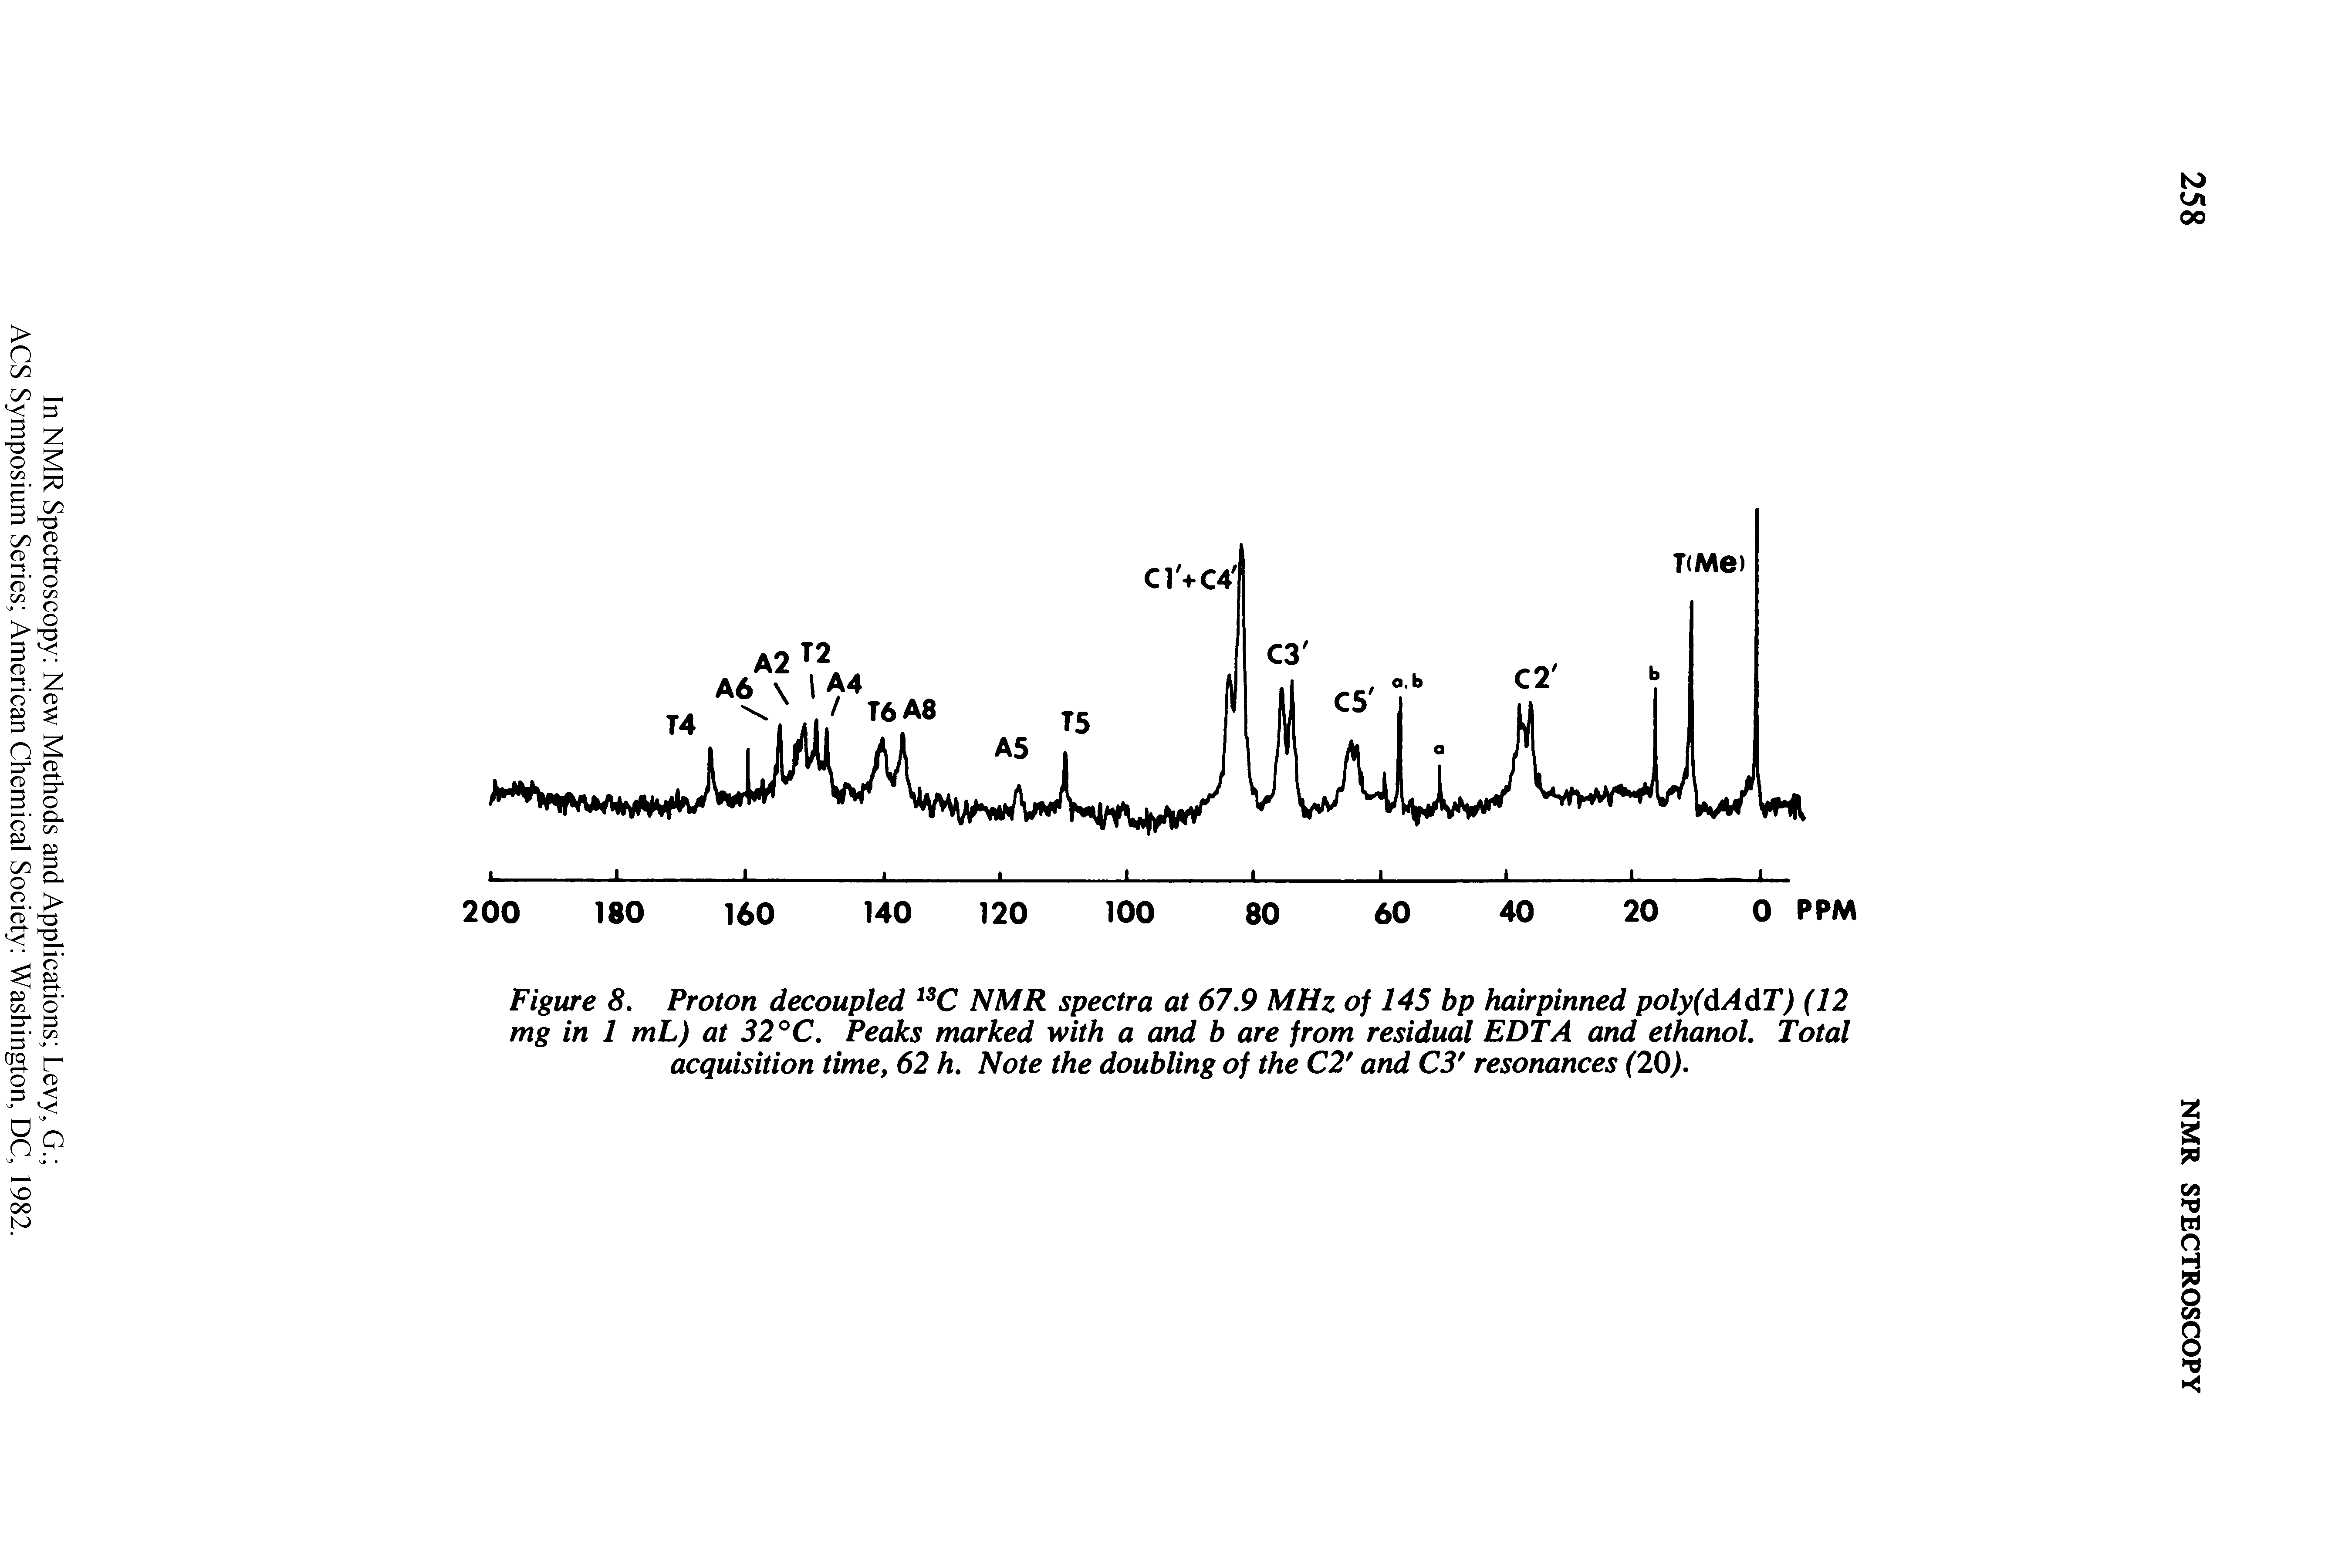 Figure 8. Proton decoupled NMR spectra at 67.9 MHz of 145 bp hairpinned poly(dAdT) (12 mg in 1 mL) at 32°C. Peaks marked with a and b are from residual EDTA and ethanol. Total acquisition time, 62 h. Note the doubling of the C2 and C3 resonances (20).